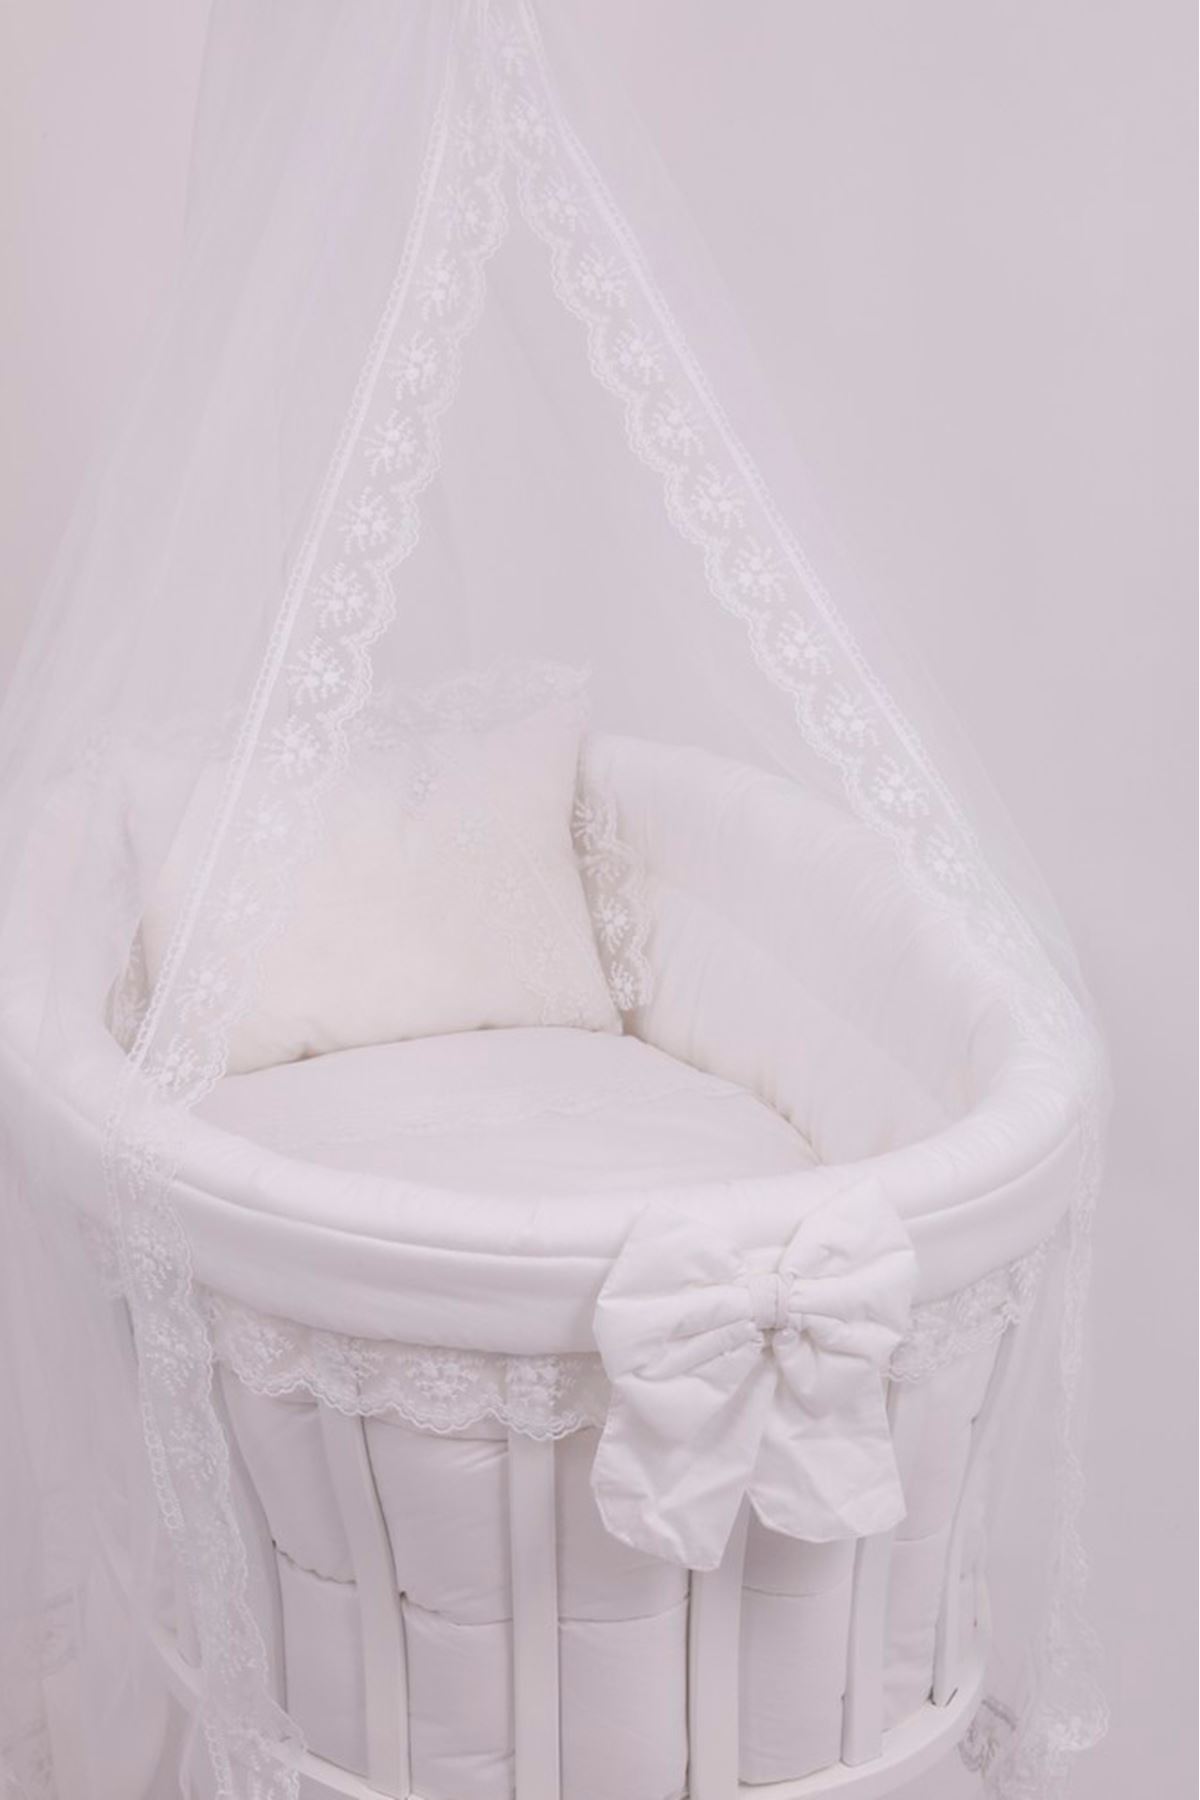 White Wooden Baby Crib with "White French Lace" Sleeping Set